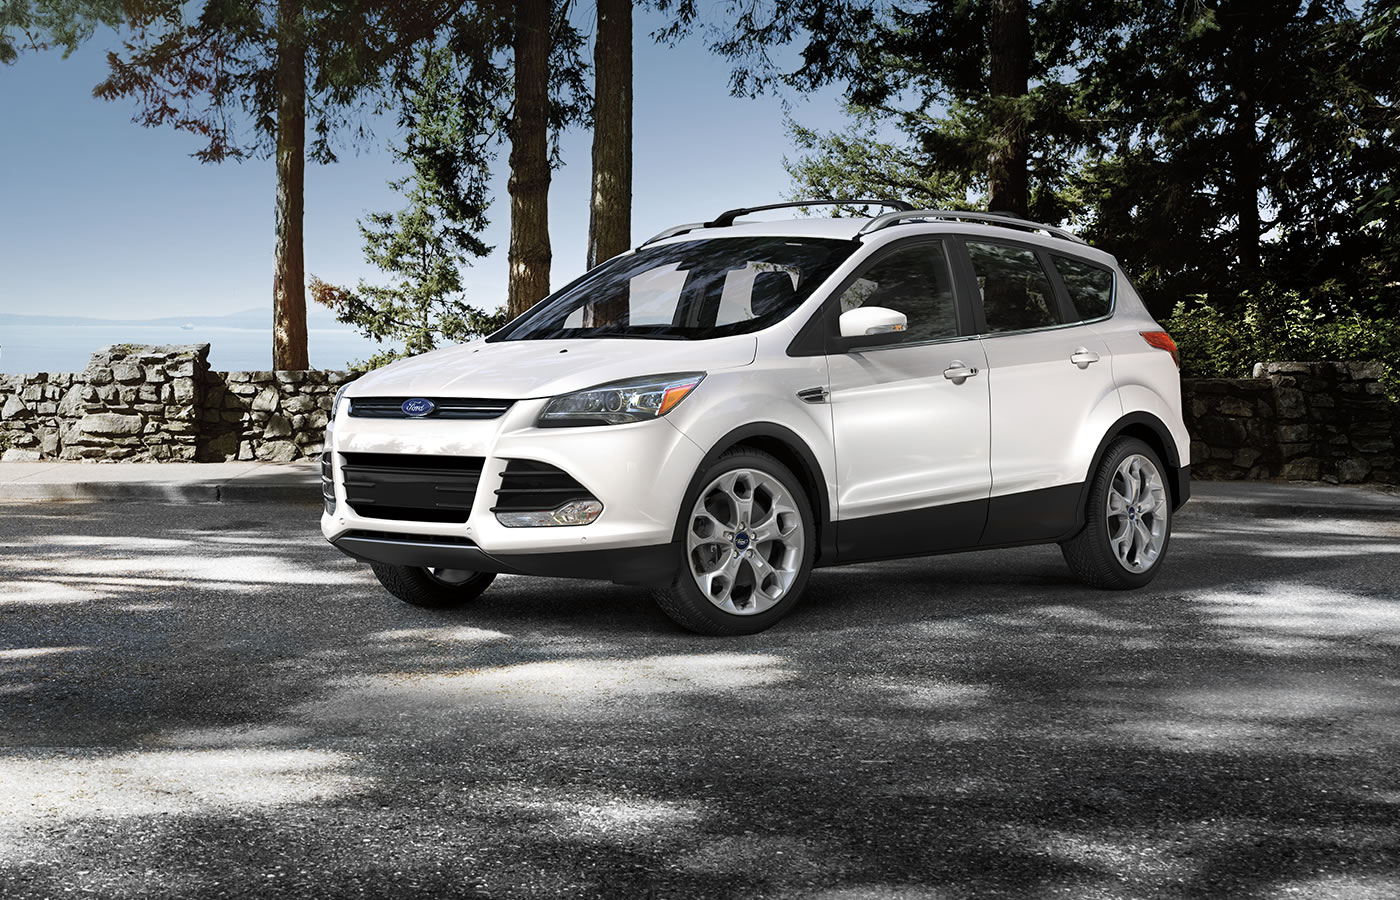 Ford Escape and Focus Are More Than 80% Recyclable